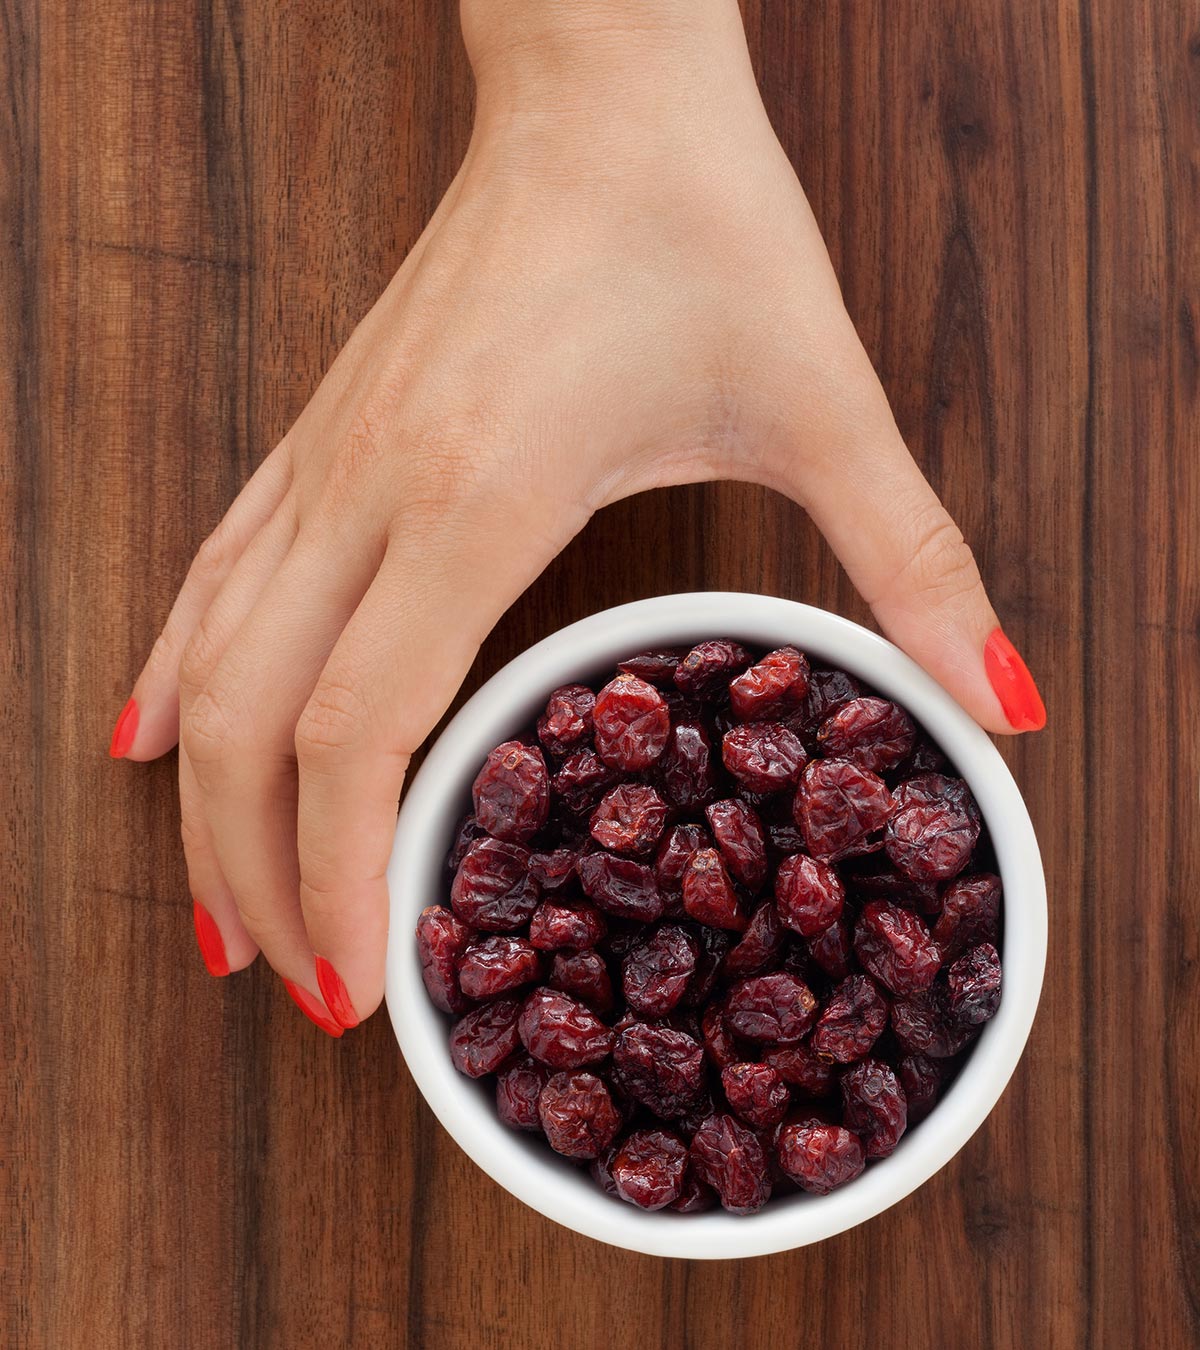 Raisins For Babies: Benefits, Side Effects, And Ways To Include In Diet